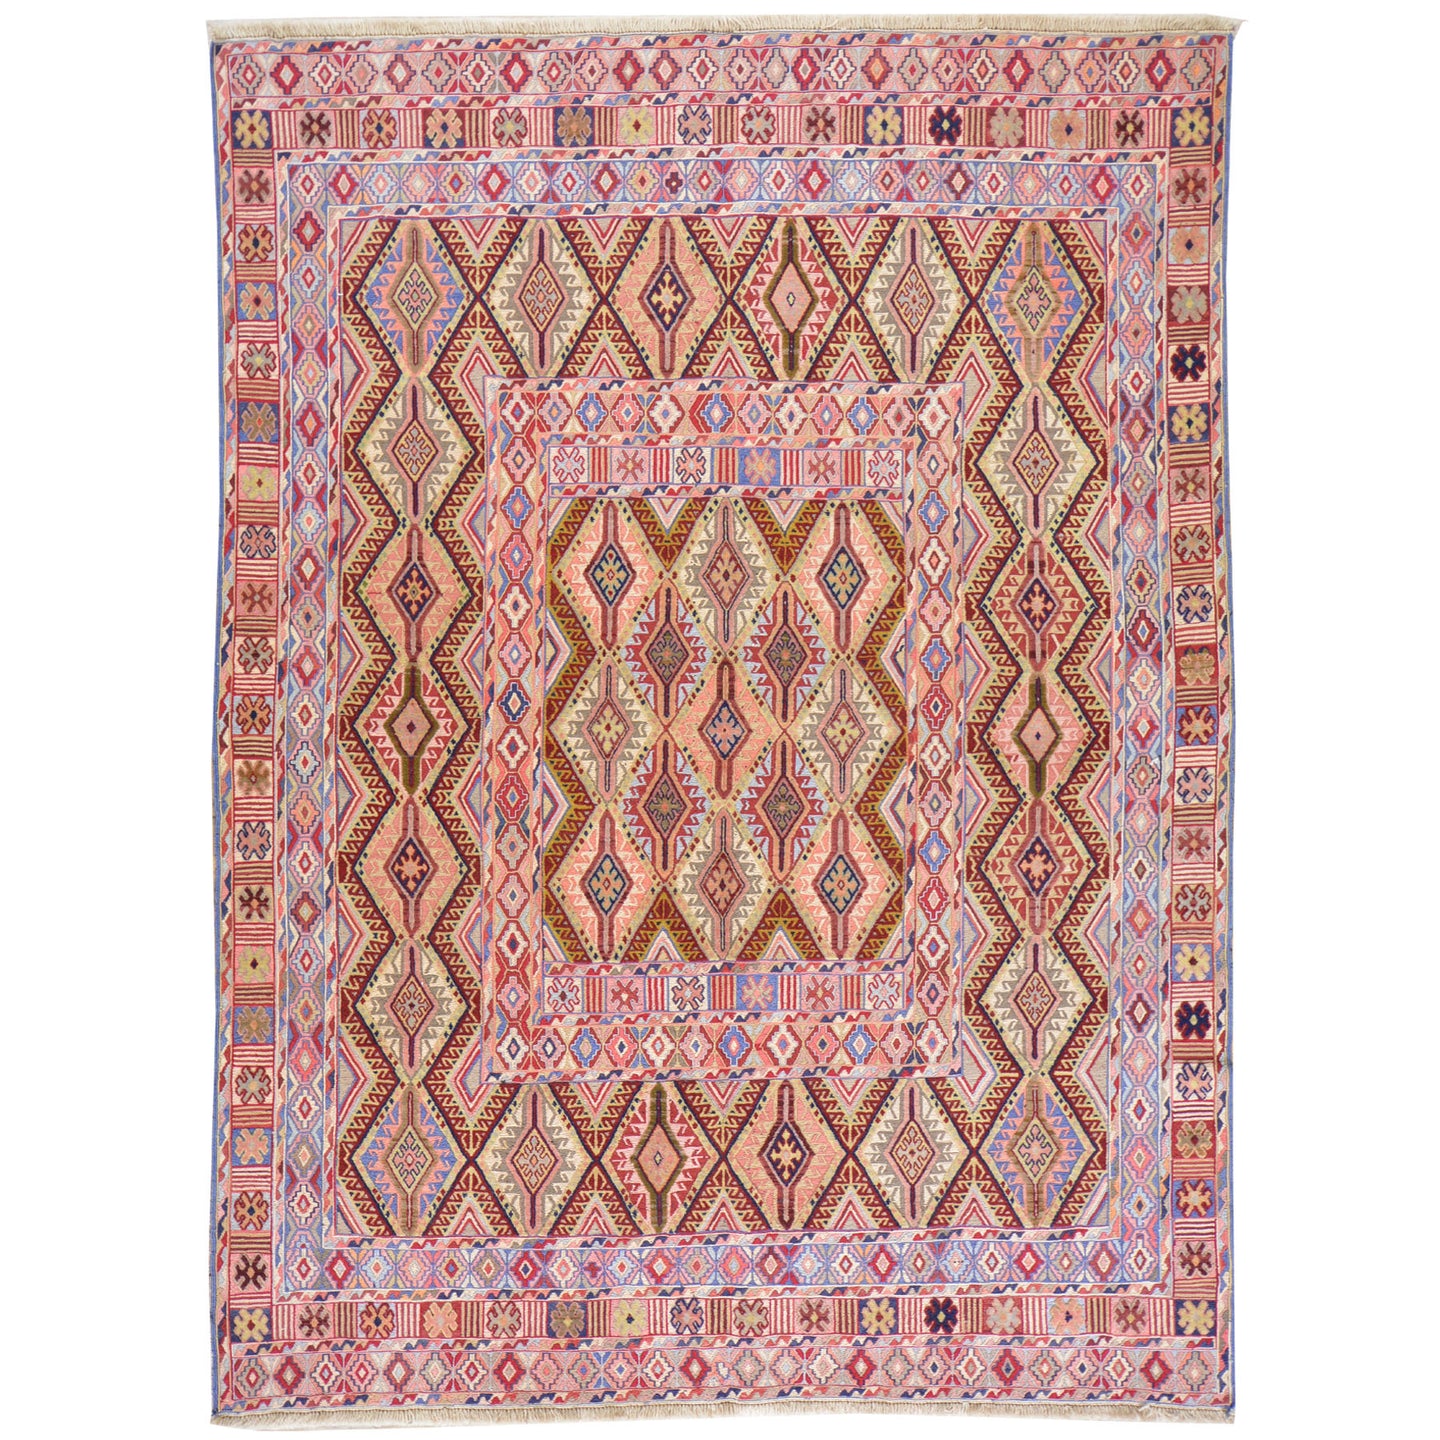 Oriental rugs, hand-knotted carpets, sustainable rugs, classic world oriental rugs, handmade, United States, interior design,  Cwrsf-1140